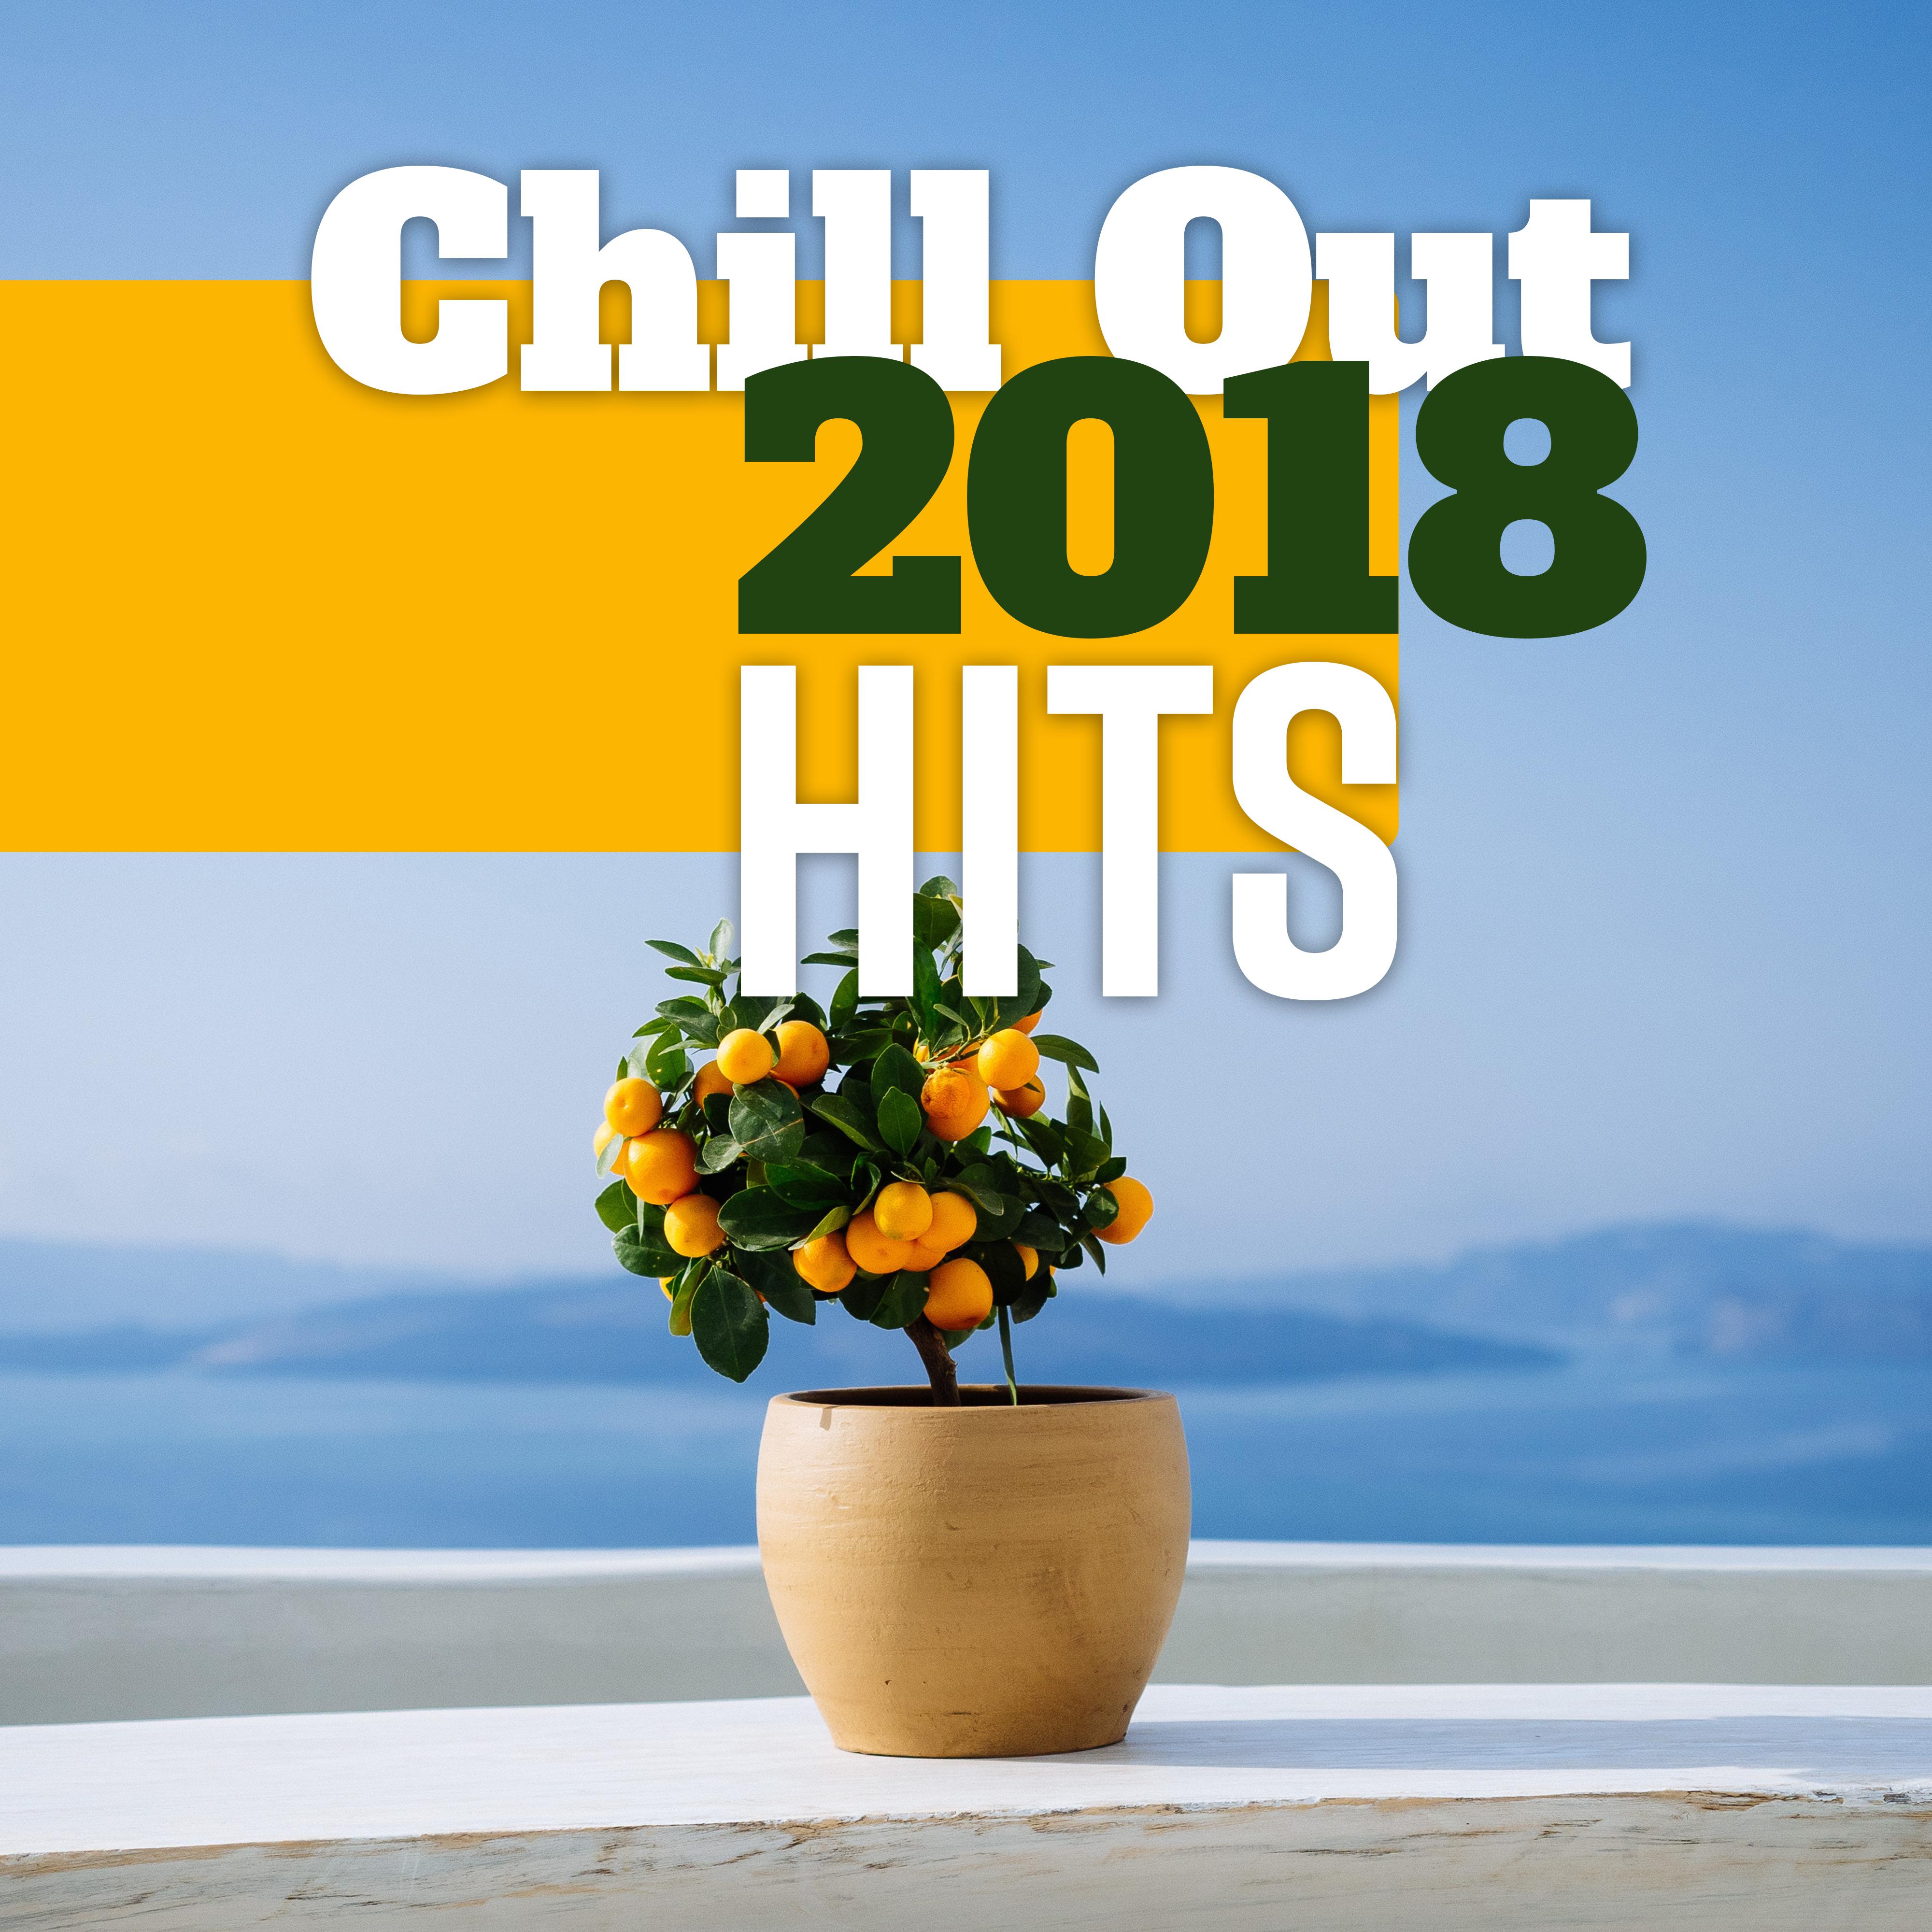 Chill Out 2018 Hits